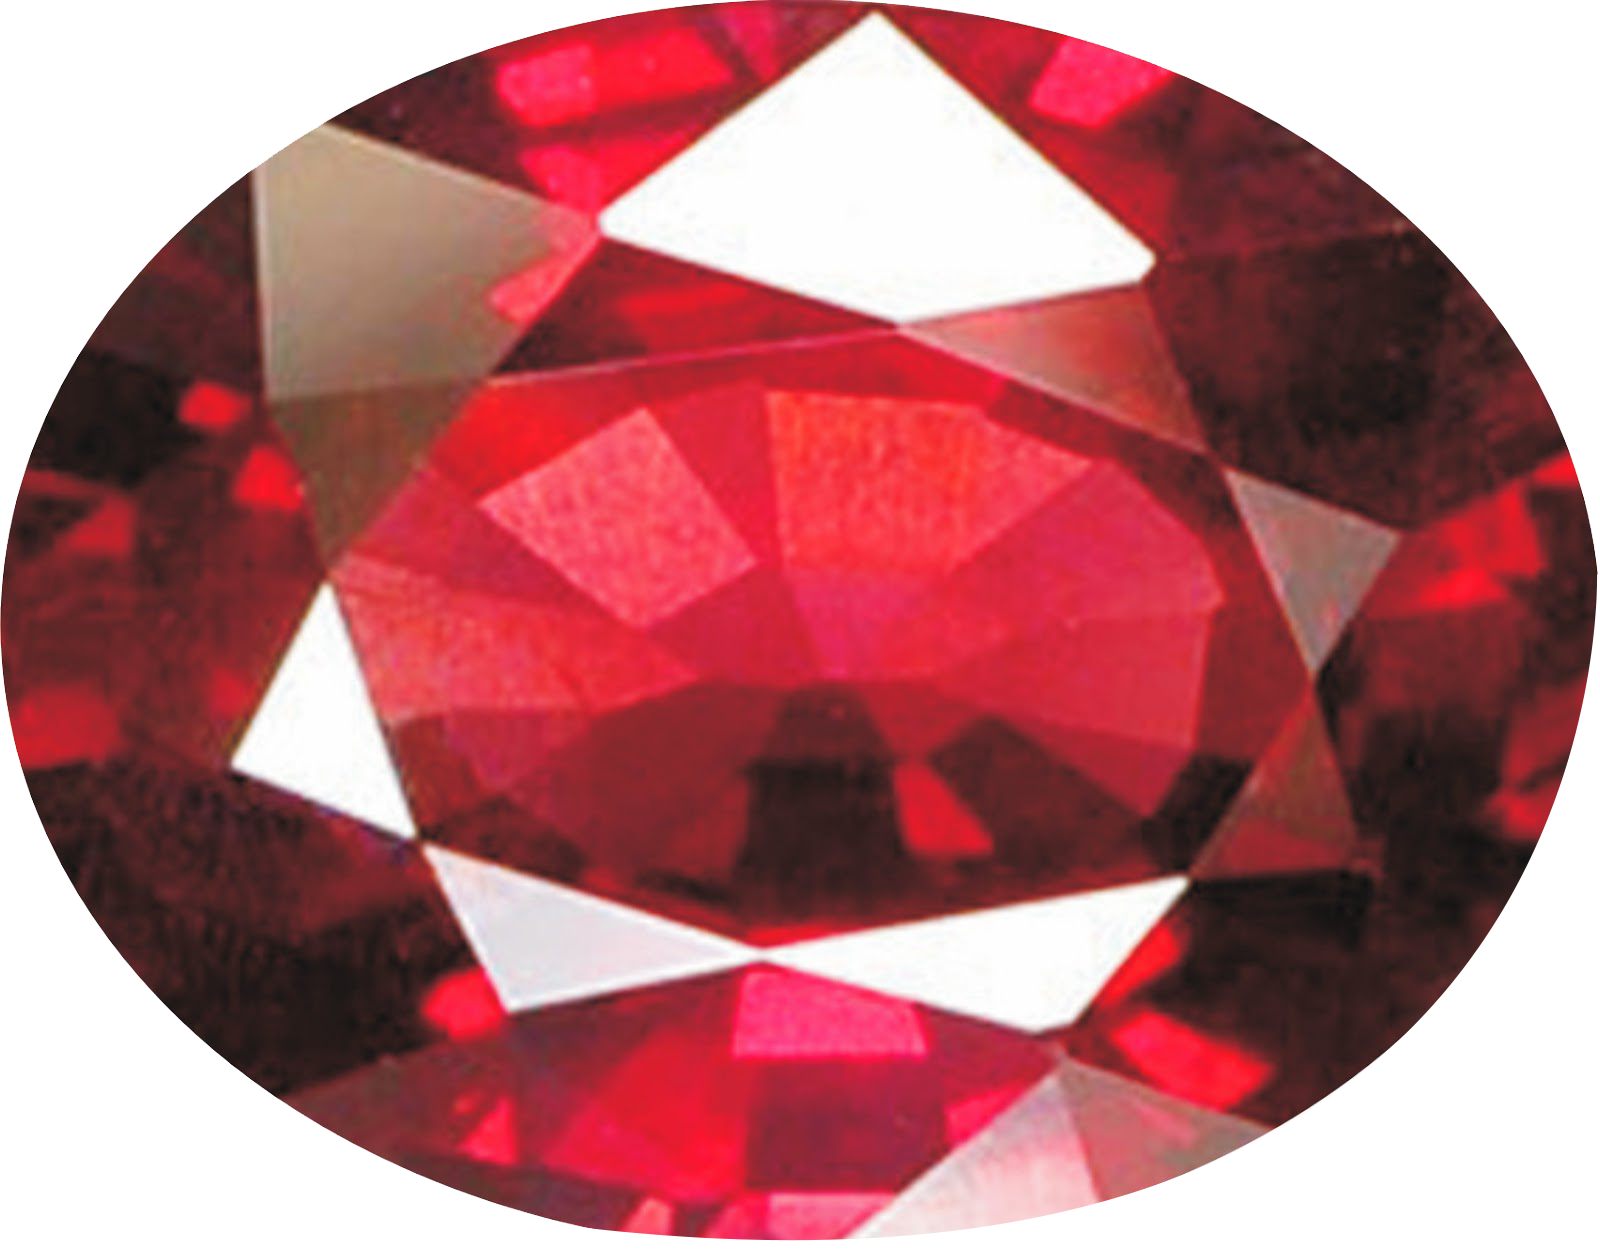 Ruby Stone PNG HD Images pngteam.com